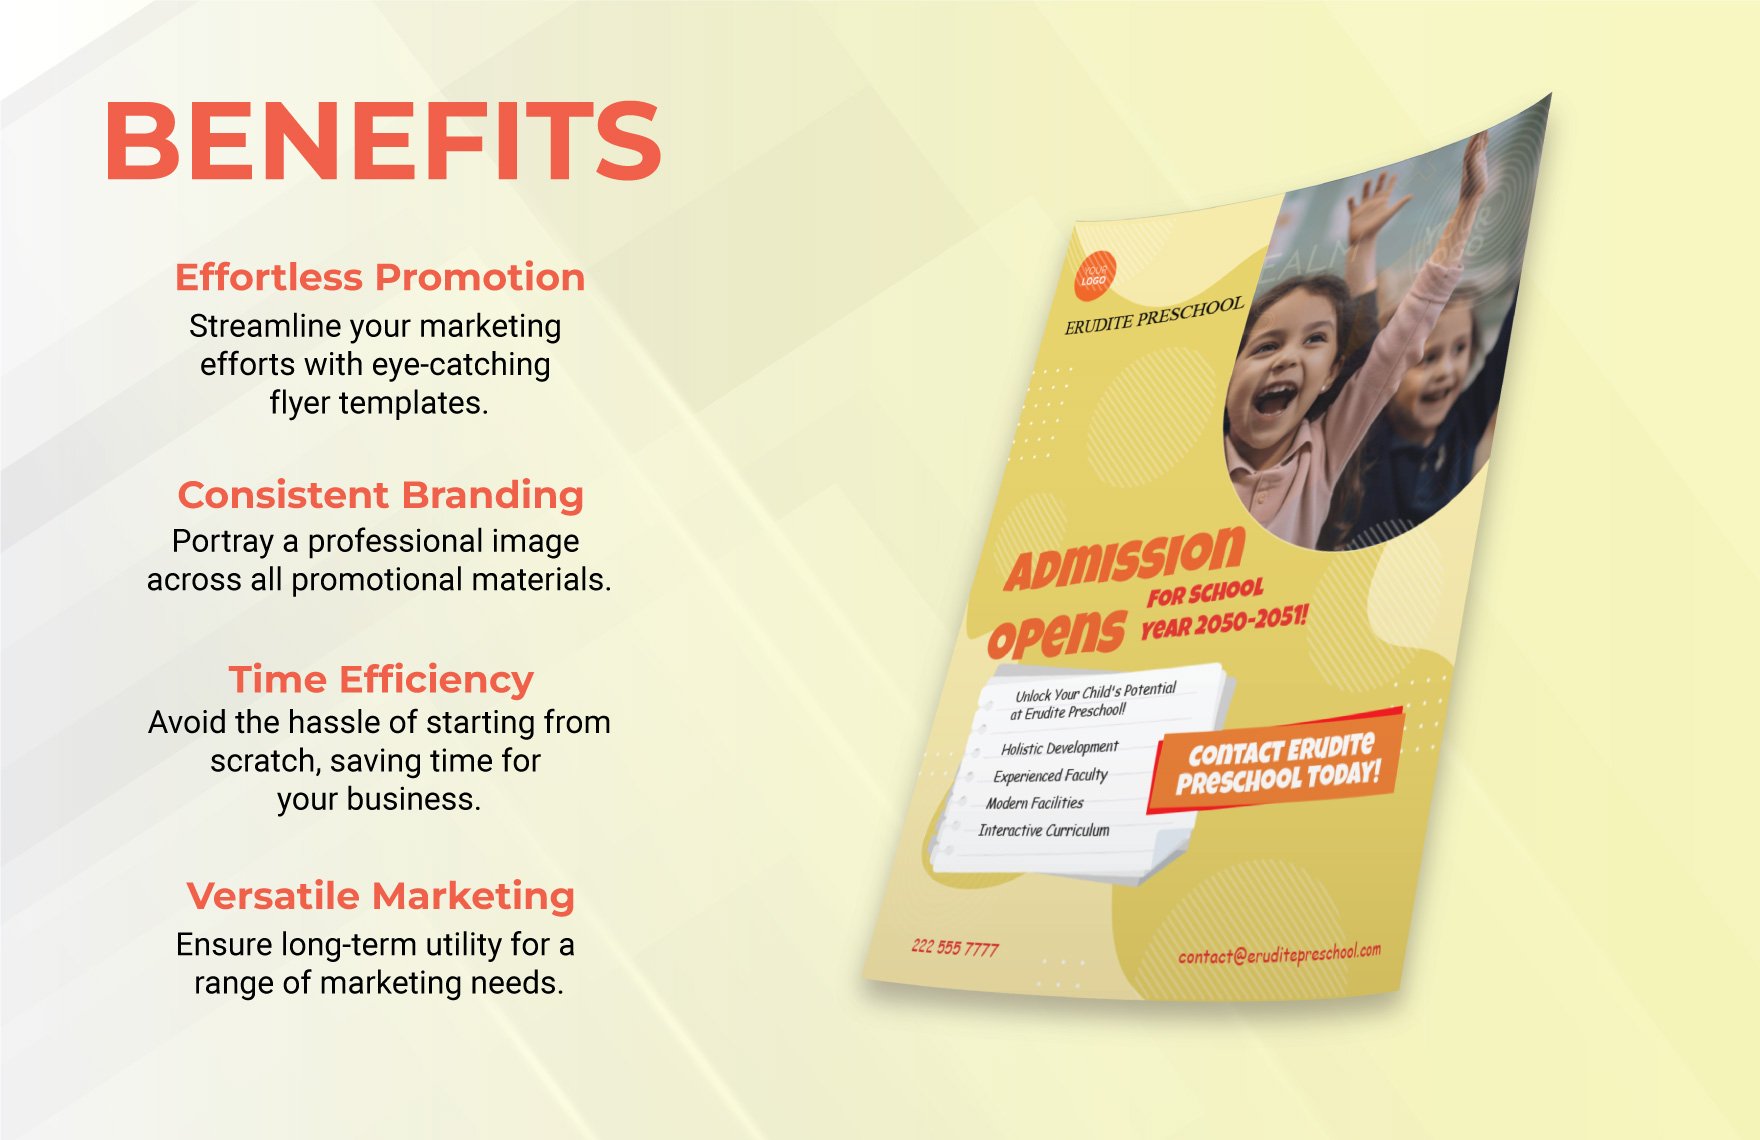 Admission Flyer Template